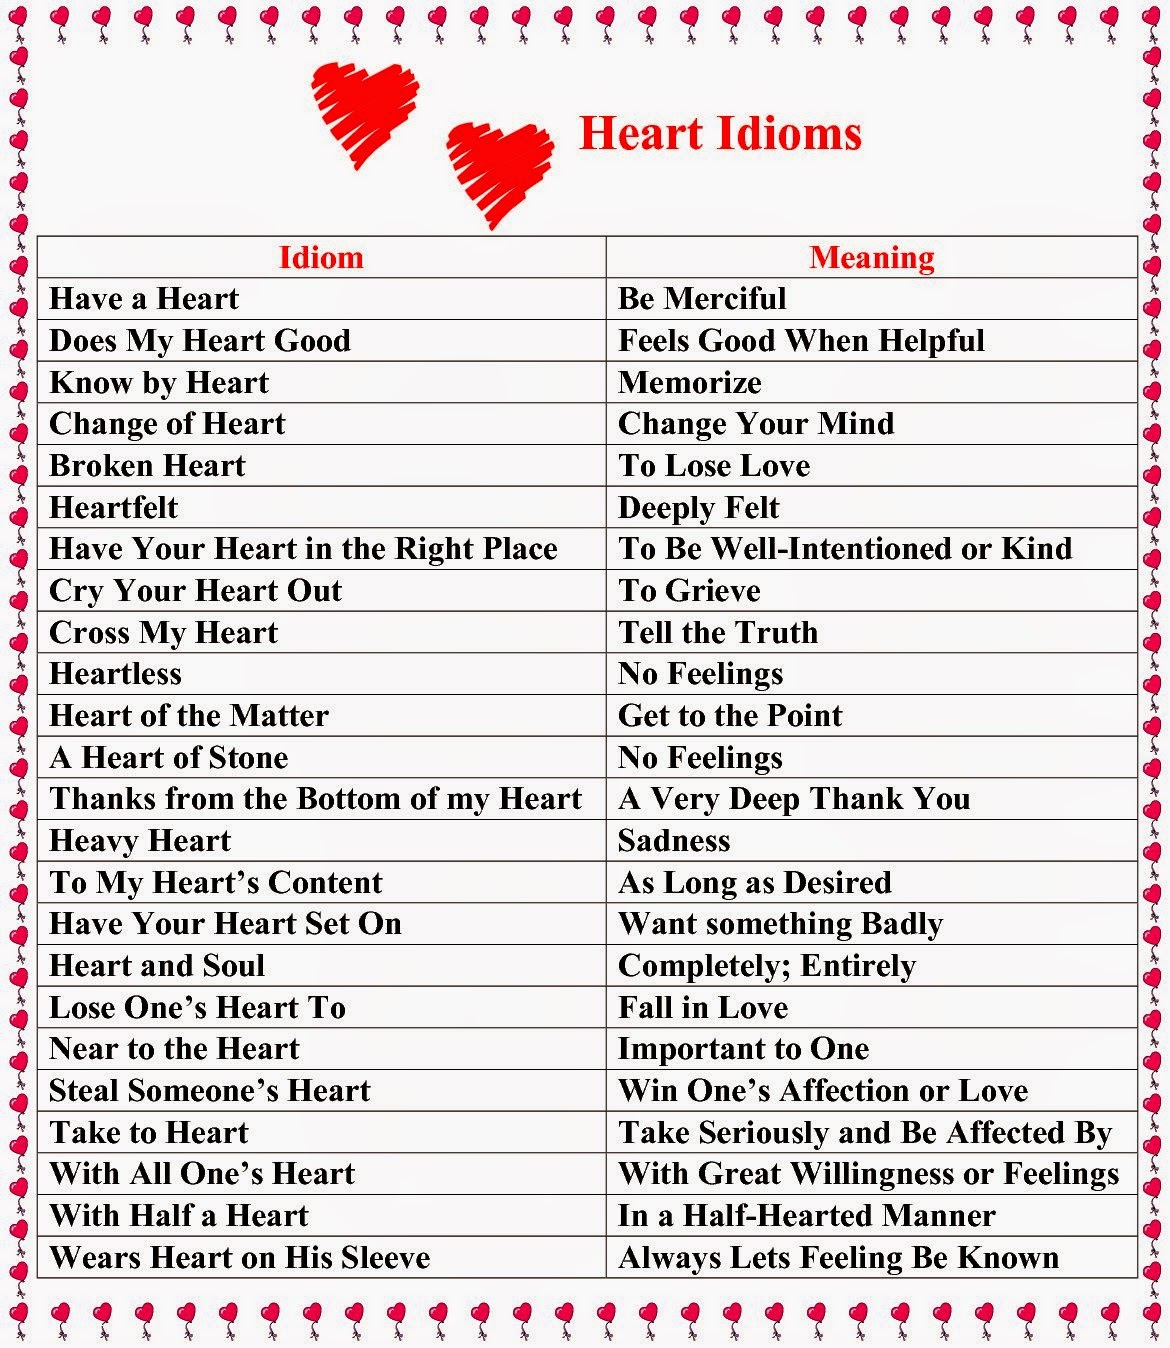 Learn words by heart. Idioms with Heart. Идиомы со словом Heart. Английские идиомы о сердце. Идиомы на английском.